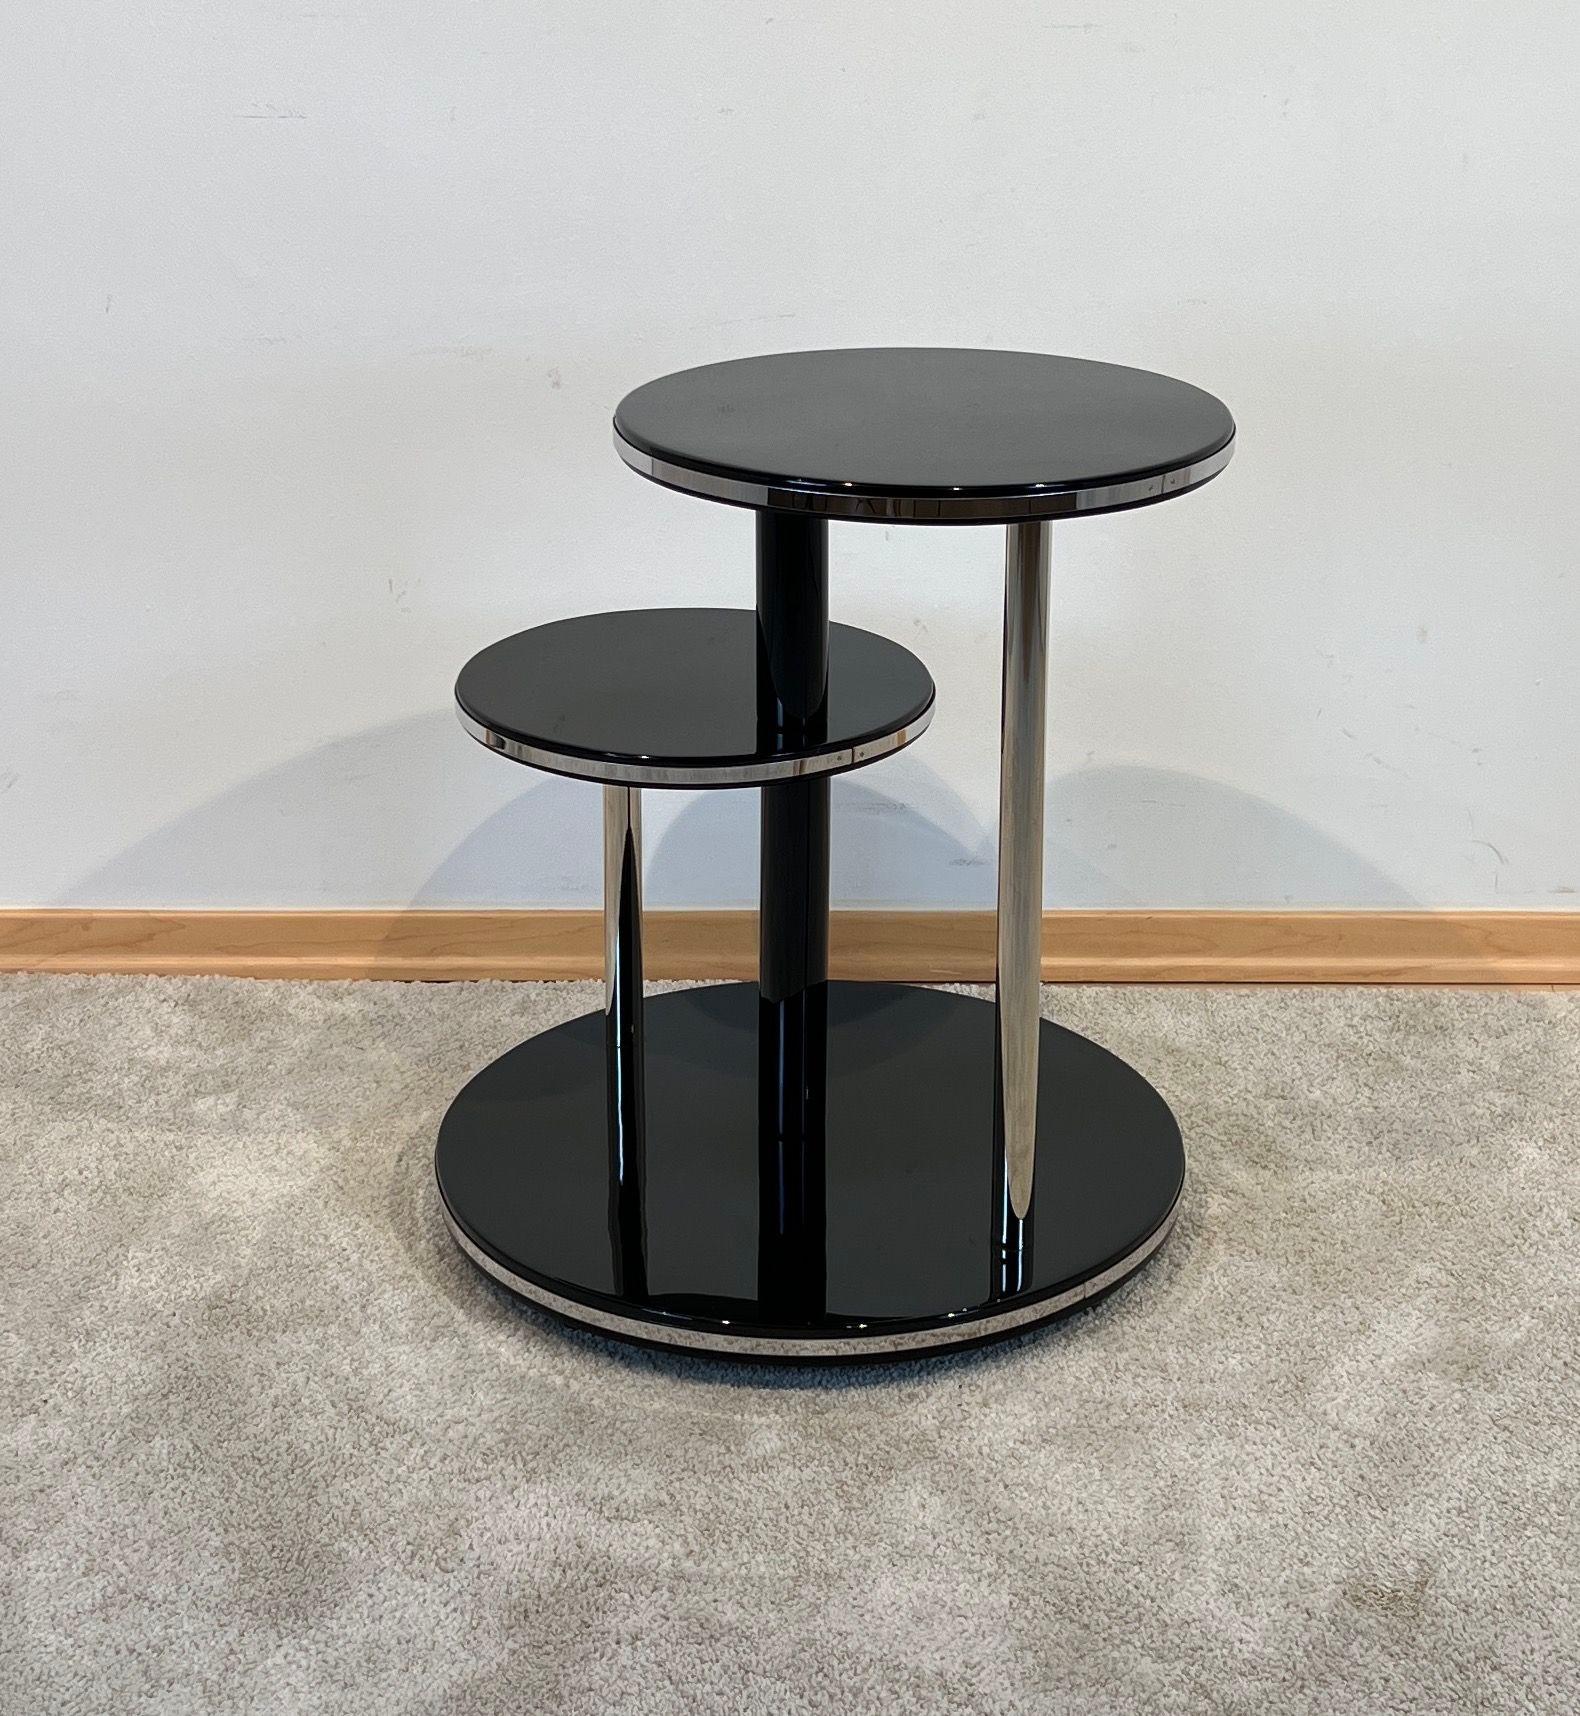 Mid-20th Century Art Deco Round Side Table, Black Lacquer, Chrome, Metal Trims, France circa 1930 For Sale